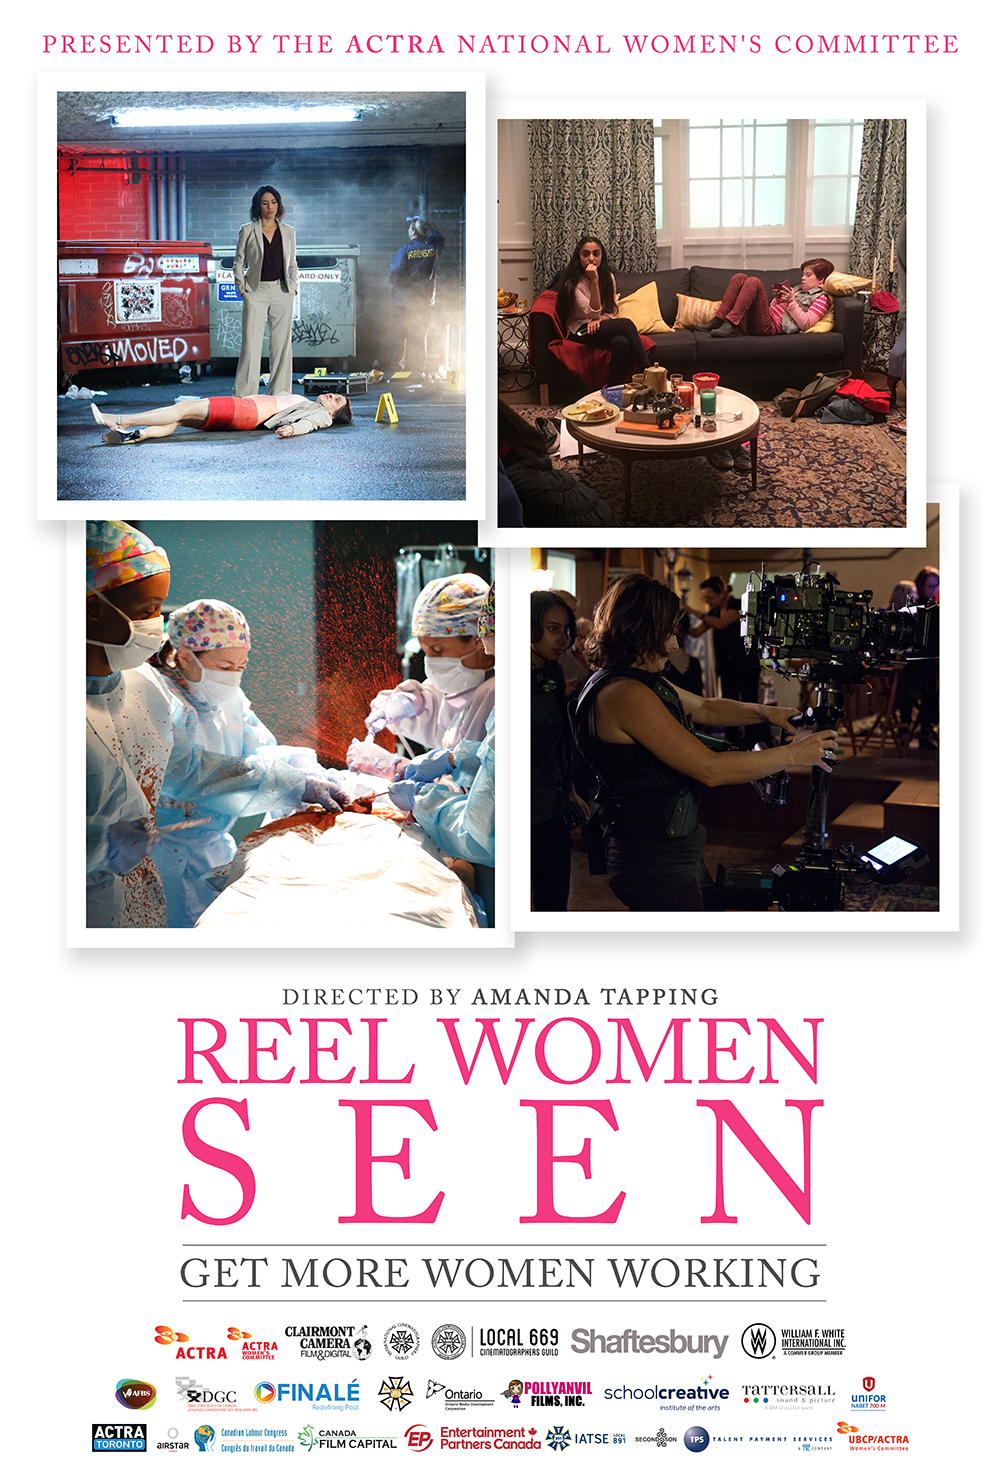 Image of a graphic with four polaroid-style images within, each of different film scenes. Text at the top reads "PRESENTED BY THE ACTRA NATIONAL WOMENS COMMITTEE" and beneath the images, "DIRECTED BY AMANDA TAPPING - REEL WOMEN SEEN - GET MORE WOMEN WORKING" 